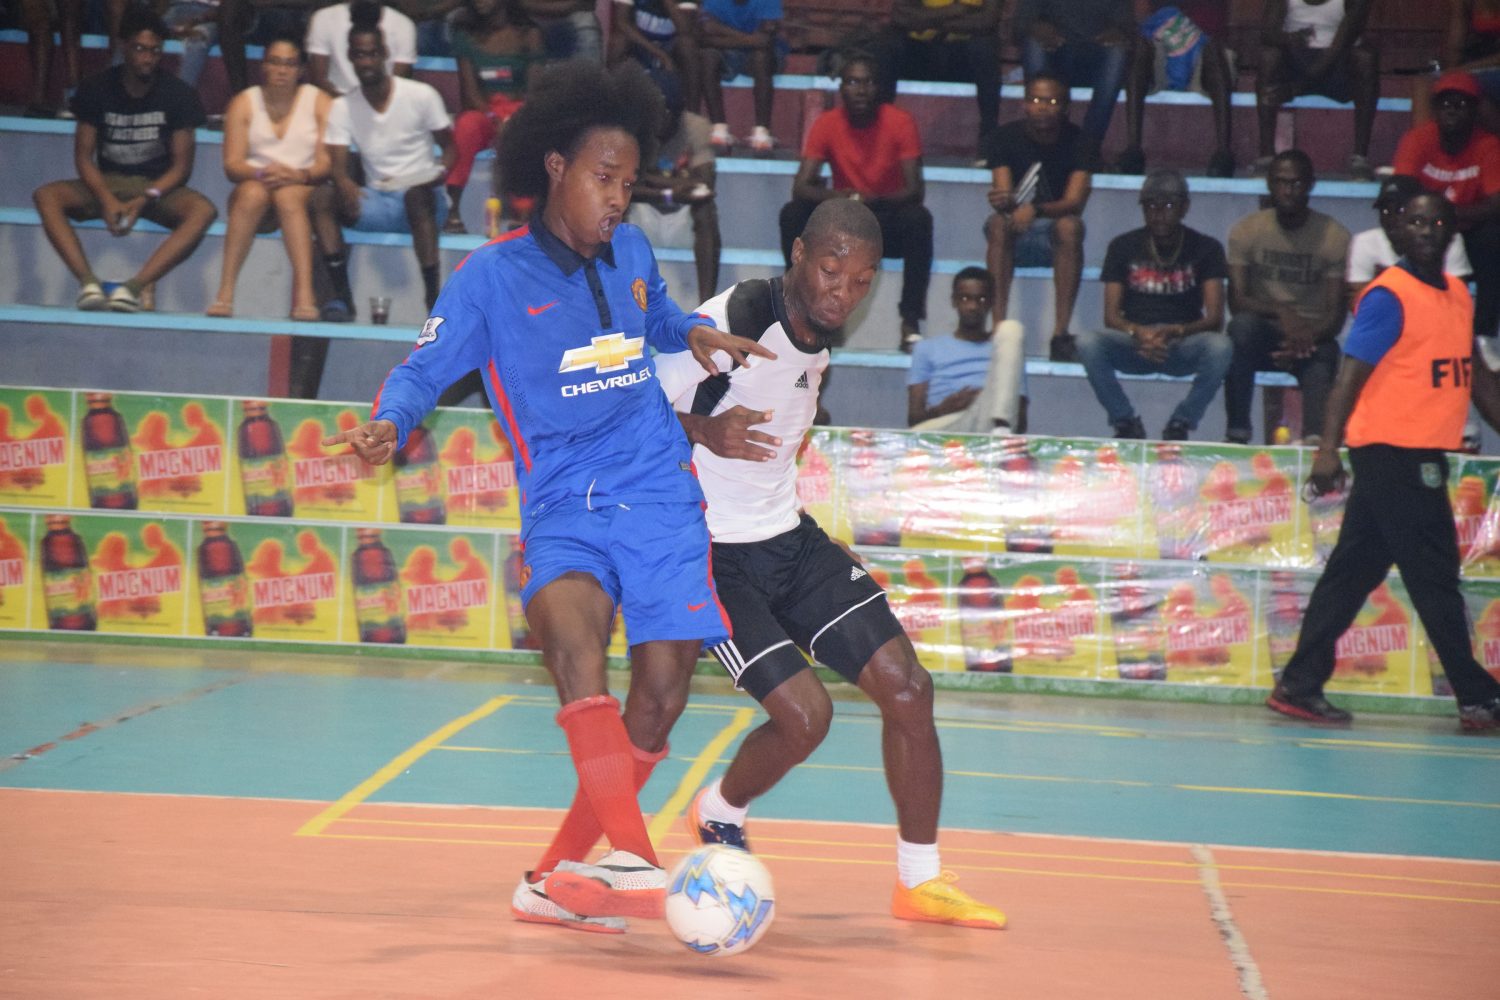 Travis Lyken (left) of Bent Street, attempting a pass, while being challenged by Dexroy Adams of Showstoppers, during their quarterfinal clash at the National Gymnasium in the Magnum Mash Futsal Championship 